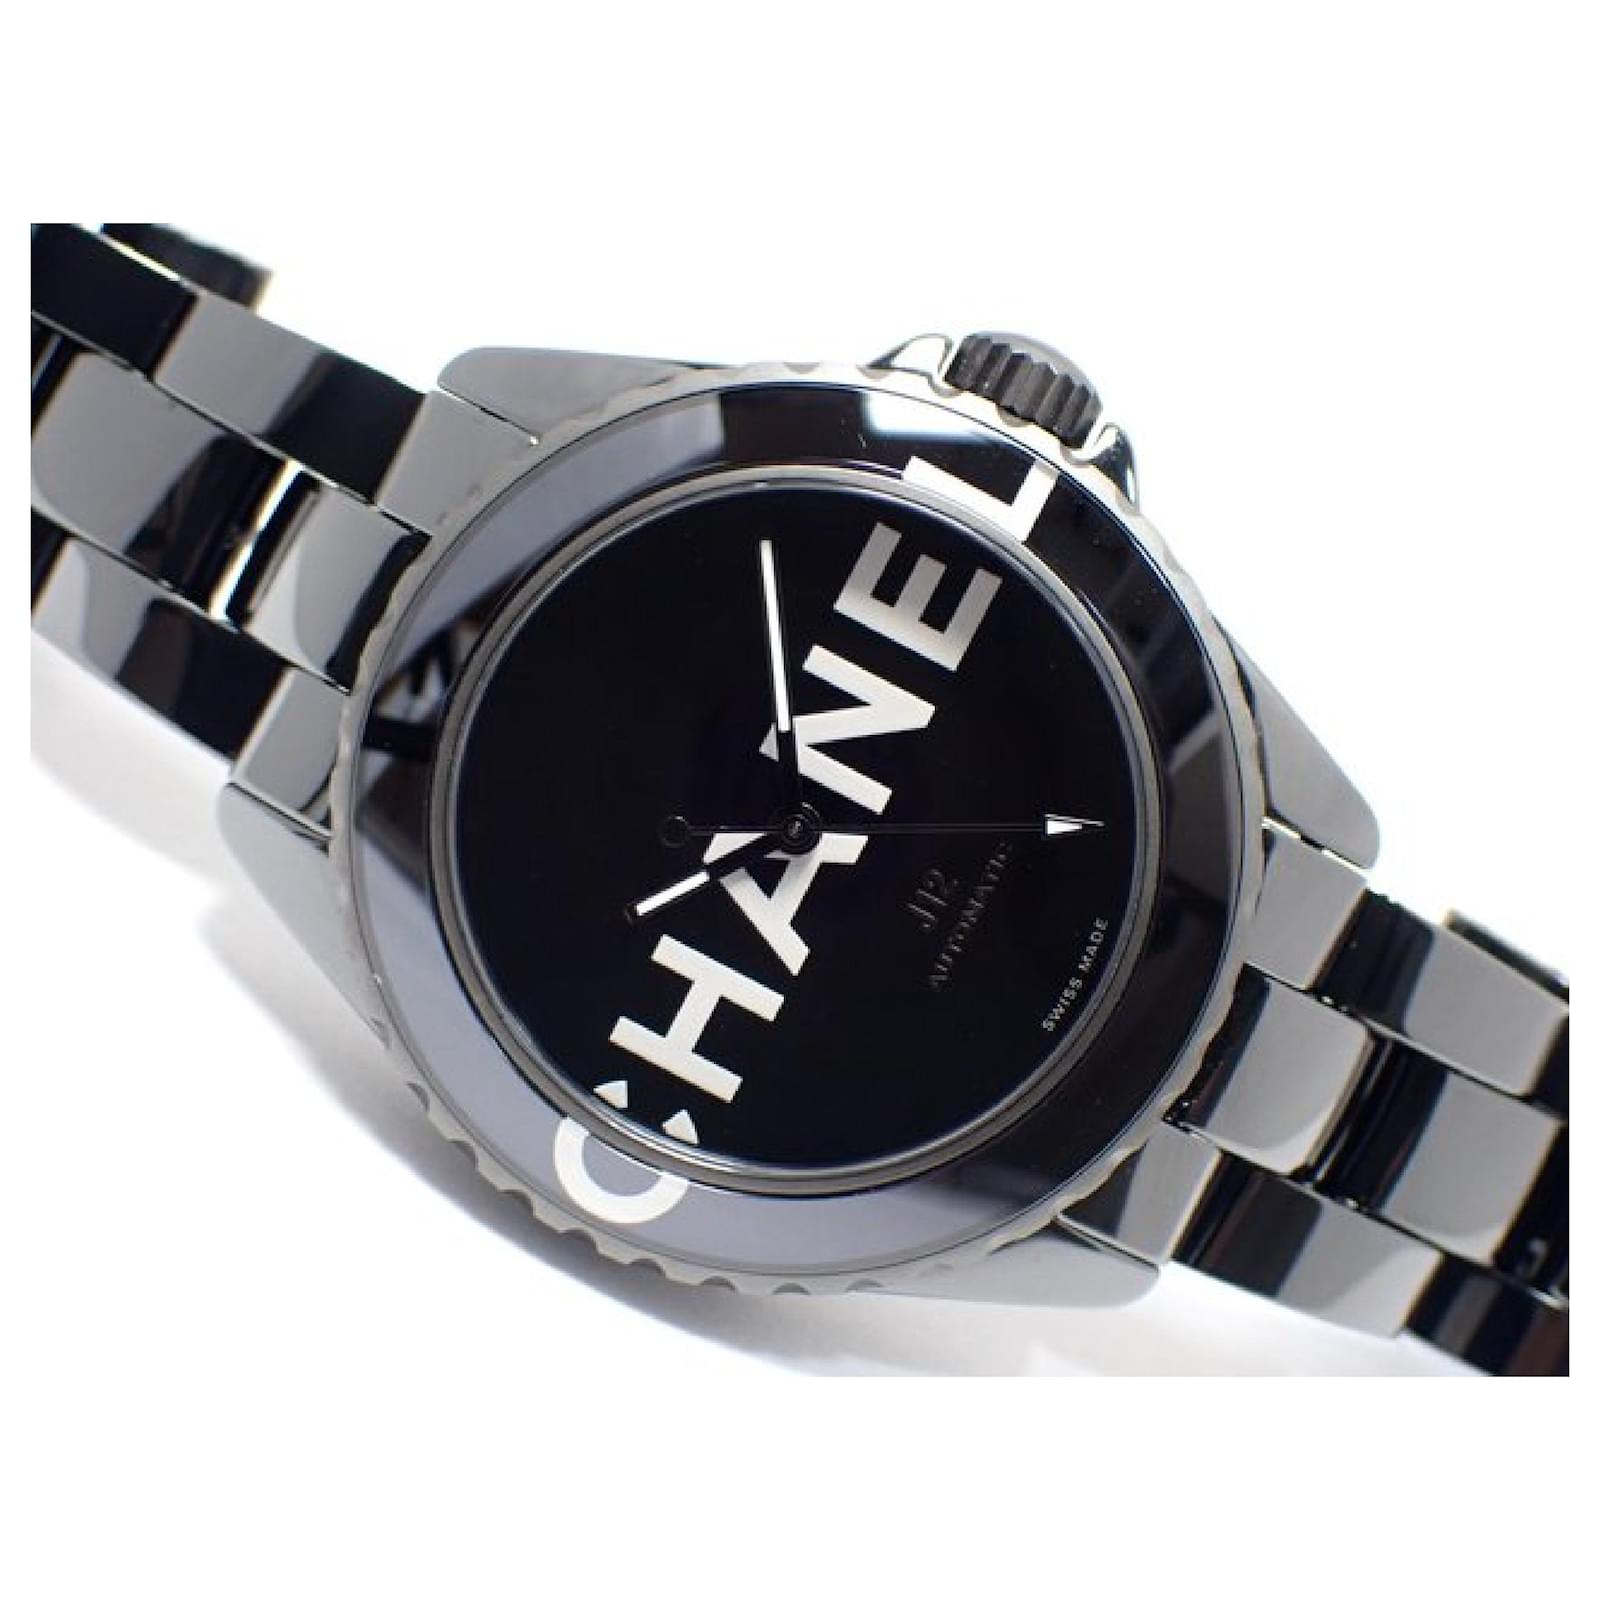 Automatic Watches Chanel Chanel J12 Wanted de H7418 Mens